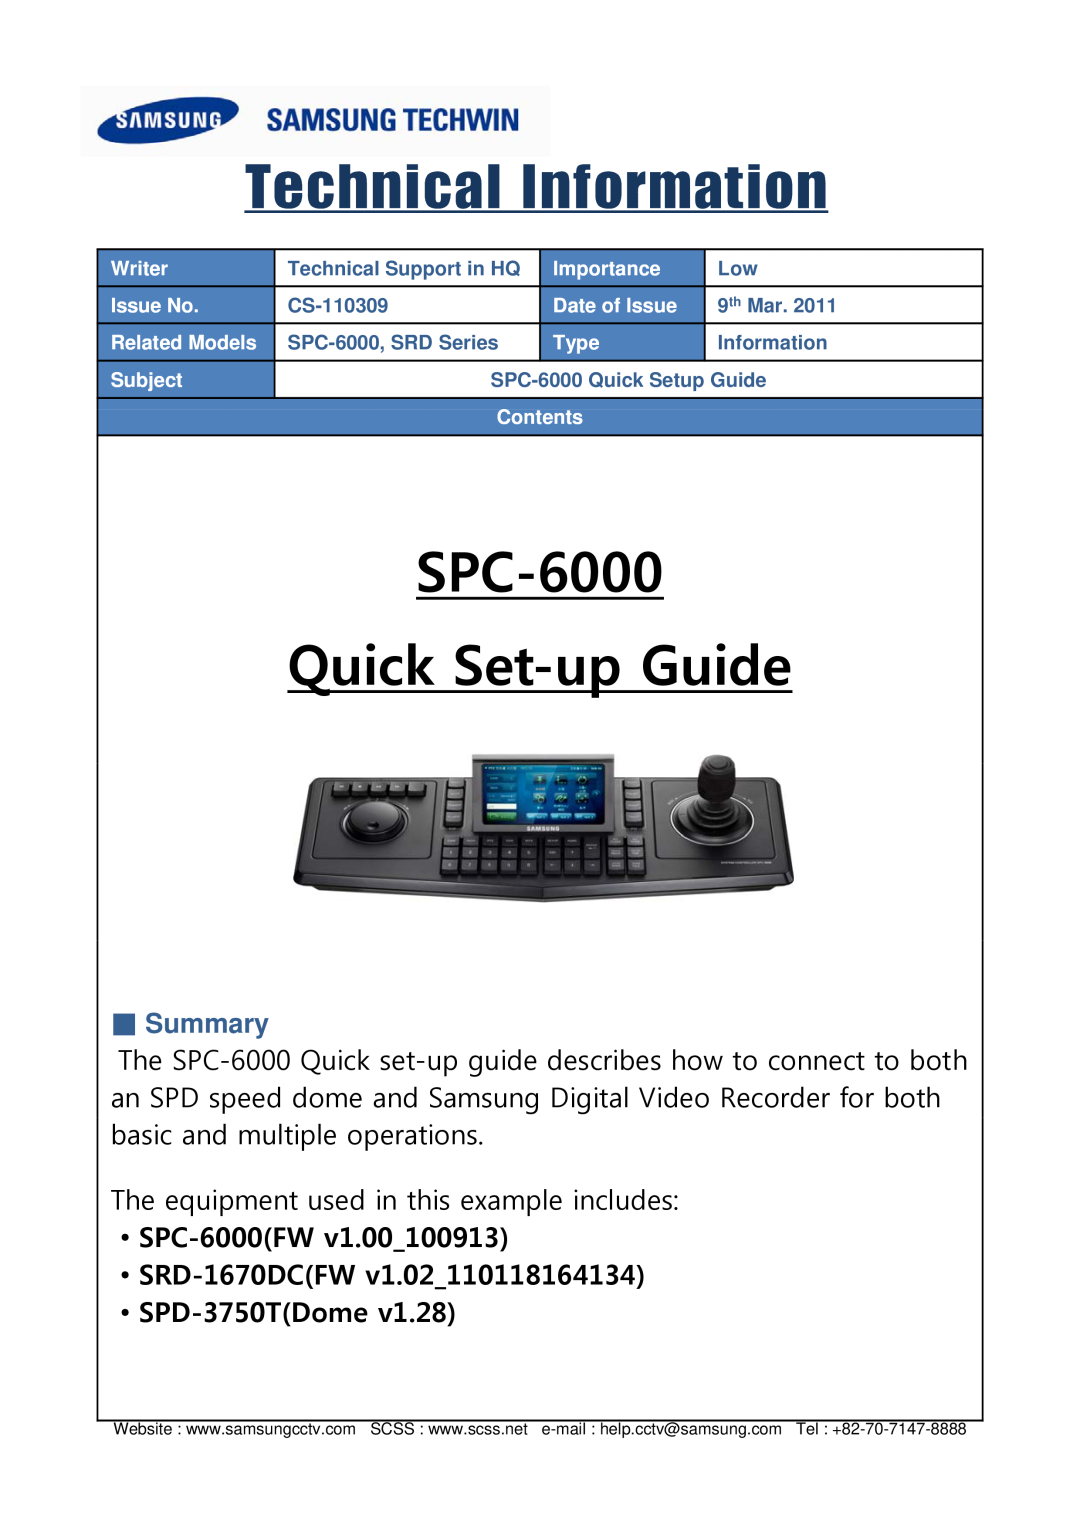 Samsung setup guide SPC-6000FW SRD-1670DCFW SPD-3750TDome, Writer, Importance, Issue No, Date of Issue, Related Models 